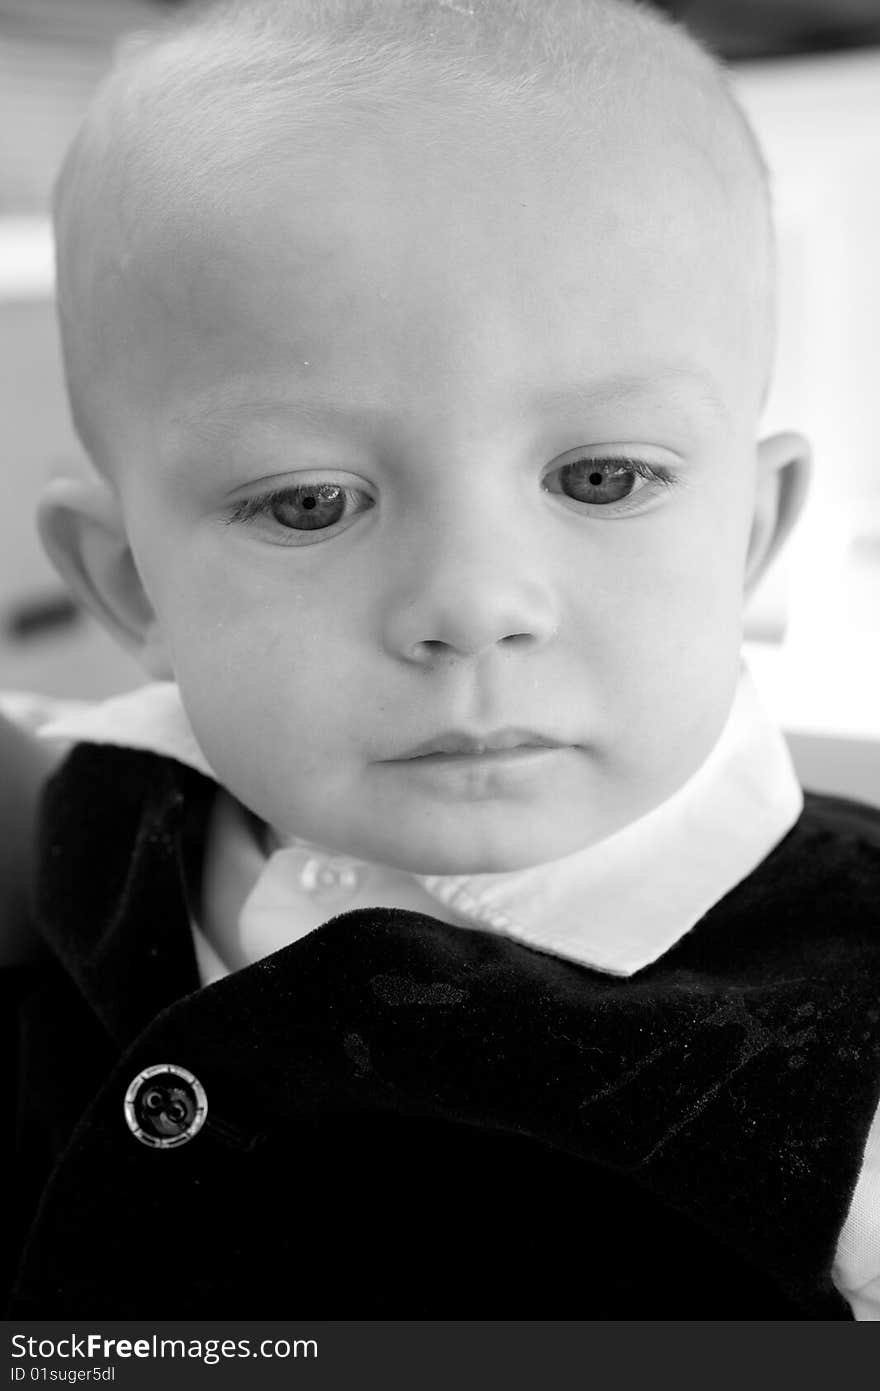 An deep thinking little boy with big blue eyes and and bald head